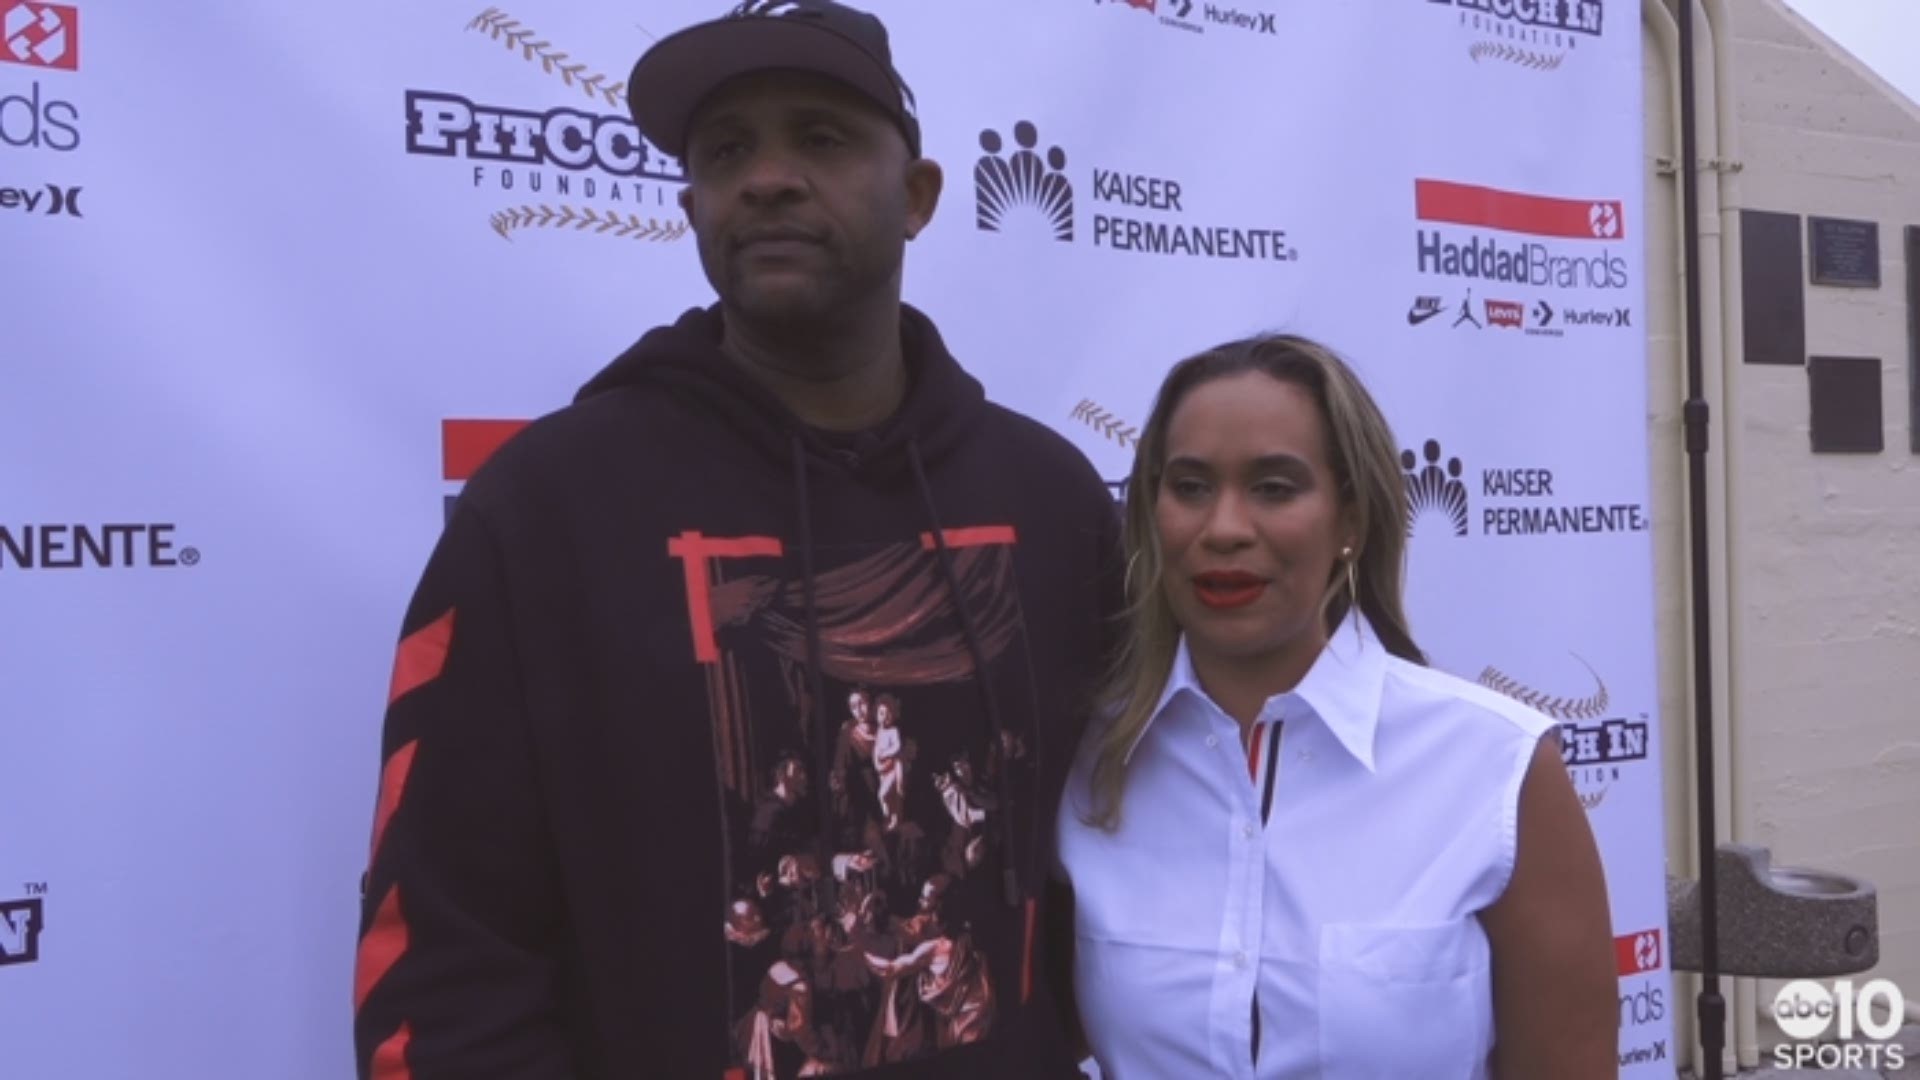 New York Yankees star pitcher CC Sabathia and his wife Amber discuss their latest charitable effort in Vallejo at their old high school.